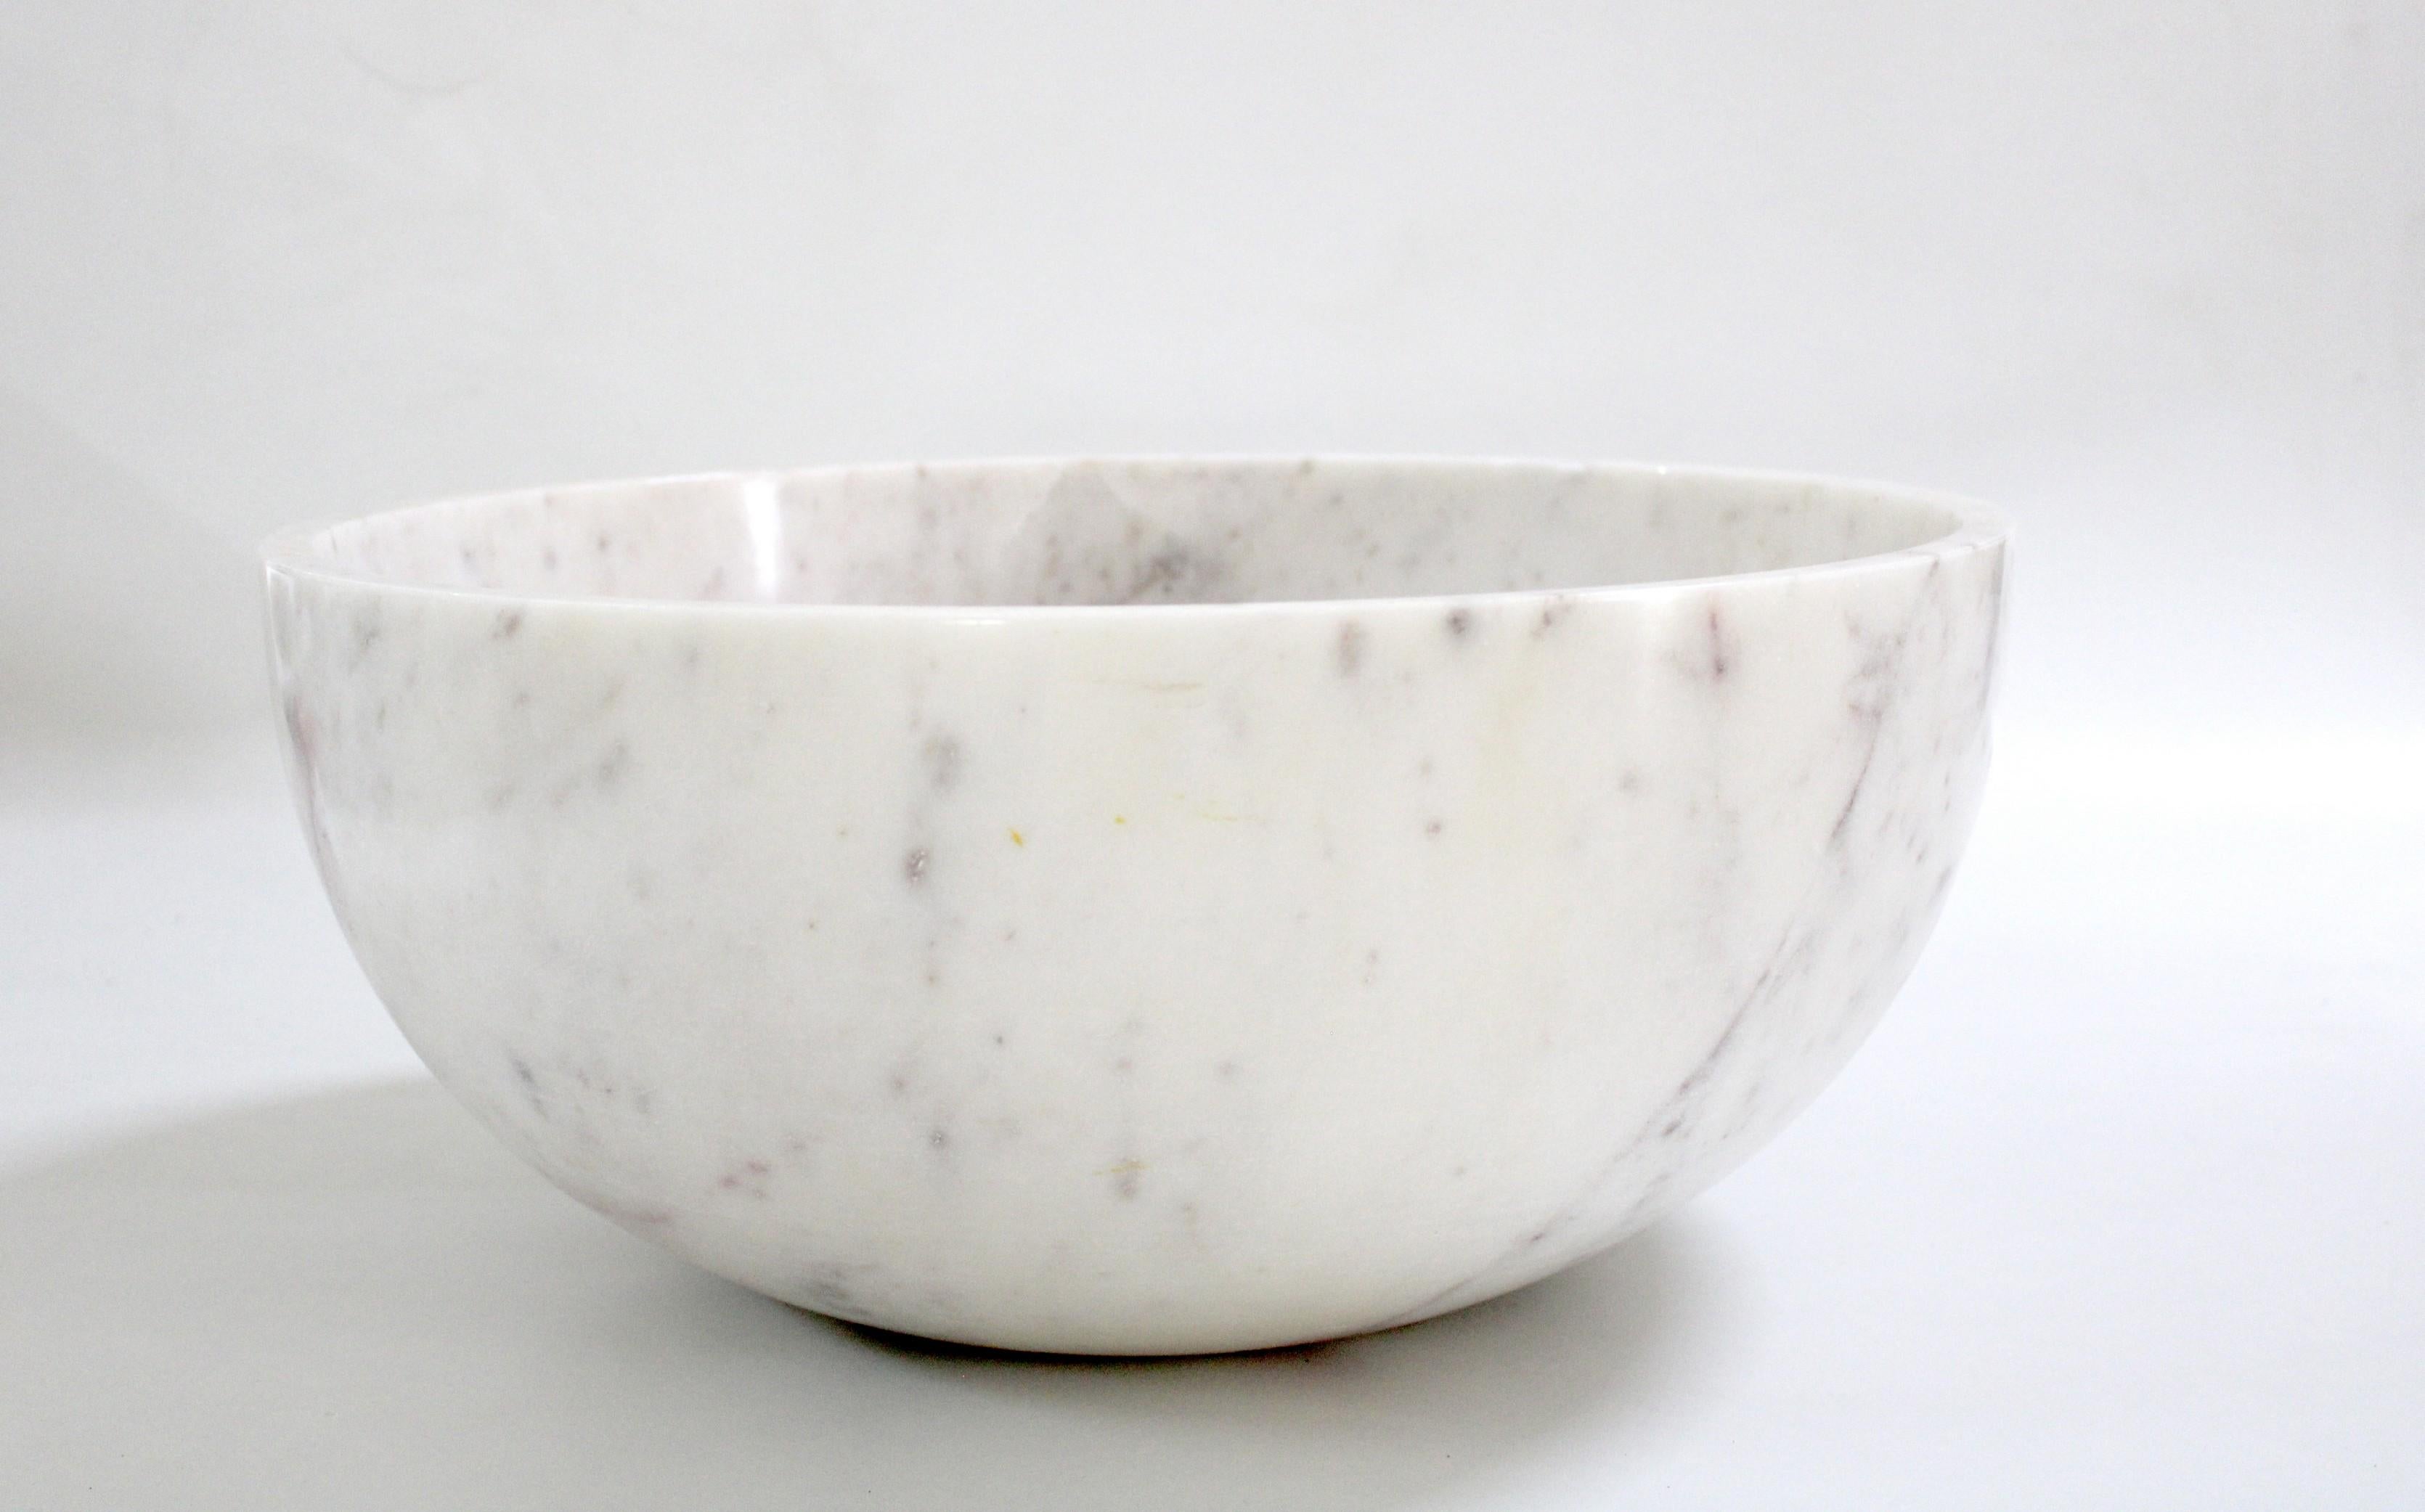 Sculpted out of a single block of marble, perfect for a potpourri, a fruit bowl or just a key catch.


Plain Bowl in White Marble
Size- 13” x 13” x 4.5” H.
Materials - White Marble, Hand-Carved


Buyer Cancellation-
The cancellation charge is 25%